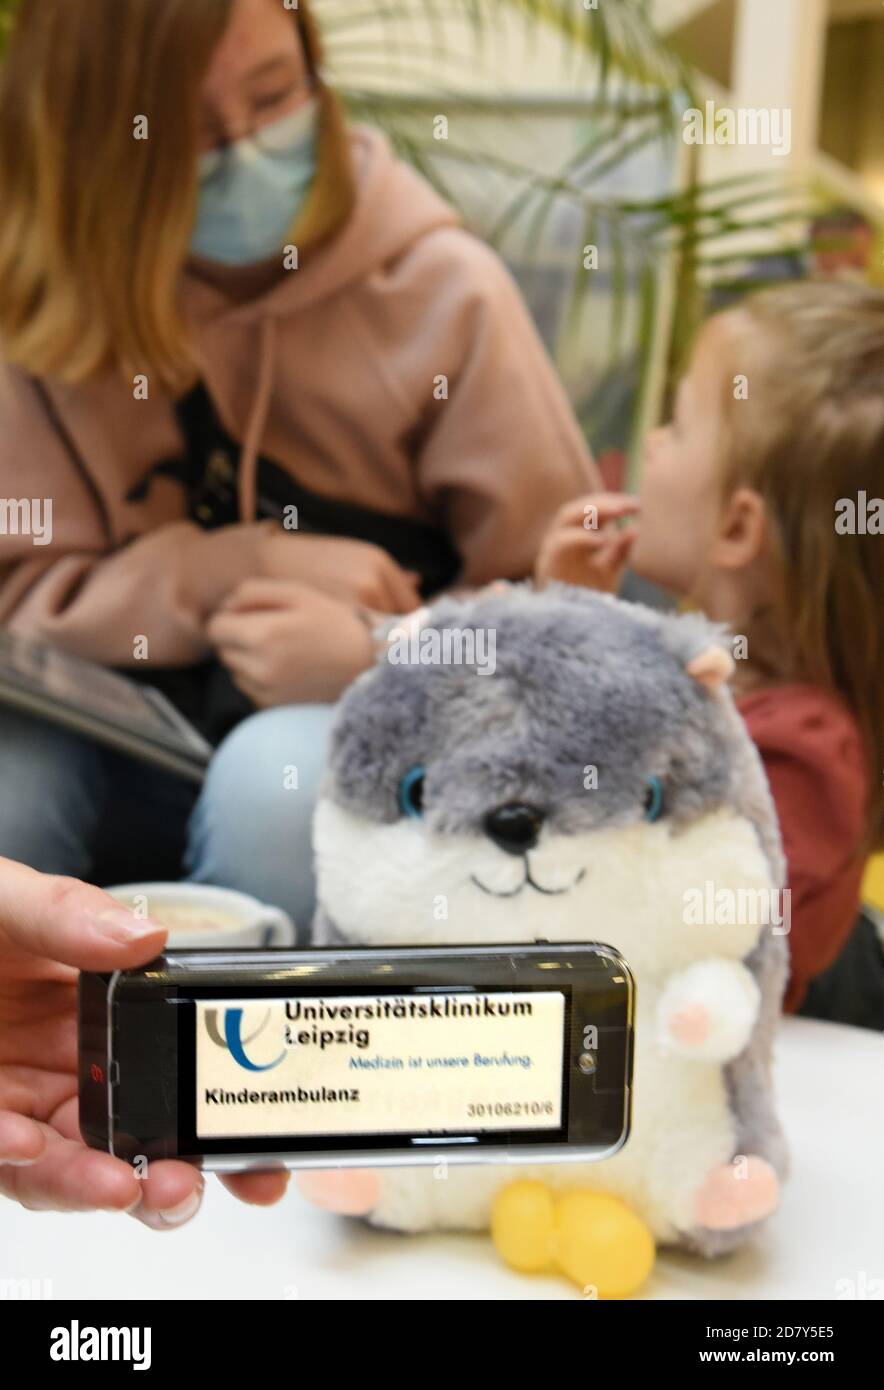 23 October 2020, Saxony-Anhalt, Köthen: In the pediatric clinic of the University Hospital, a mother sitting with her two children at a table in the cafeteria holds a pager (pager receiver) in her hand. With a buzzing sound the pager signals the call to the consulting room. In the current time with increasing corona numbers, the new paging system, which allows patients to move up to 500 meters away, is intended to equalize the situation in the waiting areas. The pagers should make it possible to maintain the distances even in the case of a large crowd. The paging receivers are currently being Stock Photo